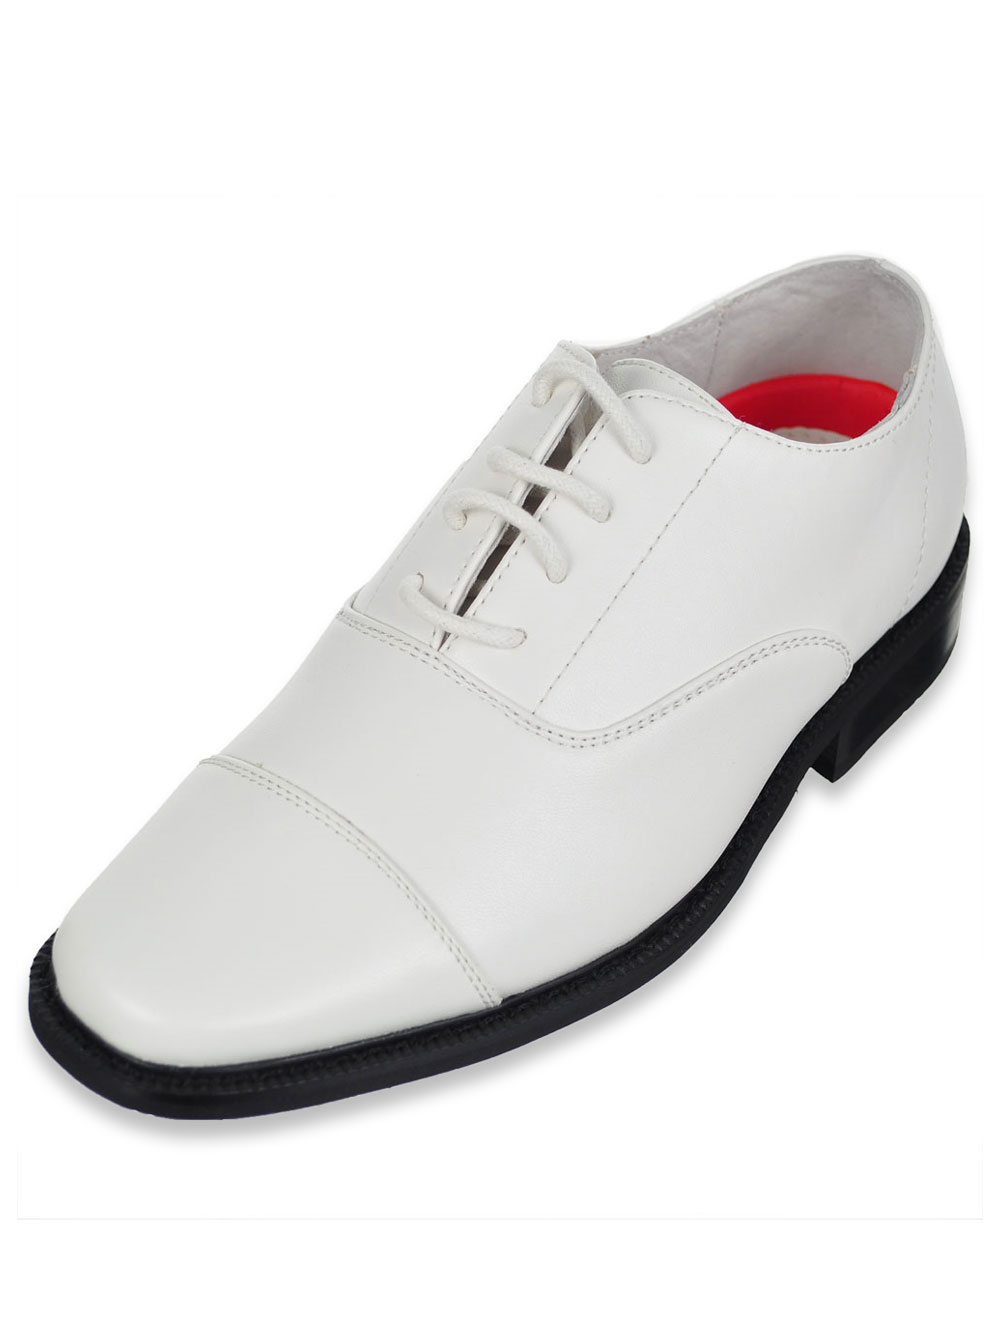 white dress shoes for infant boy